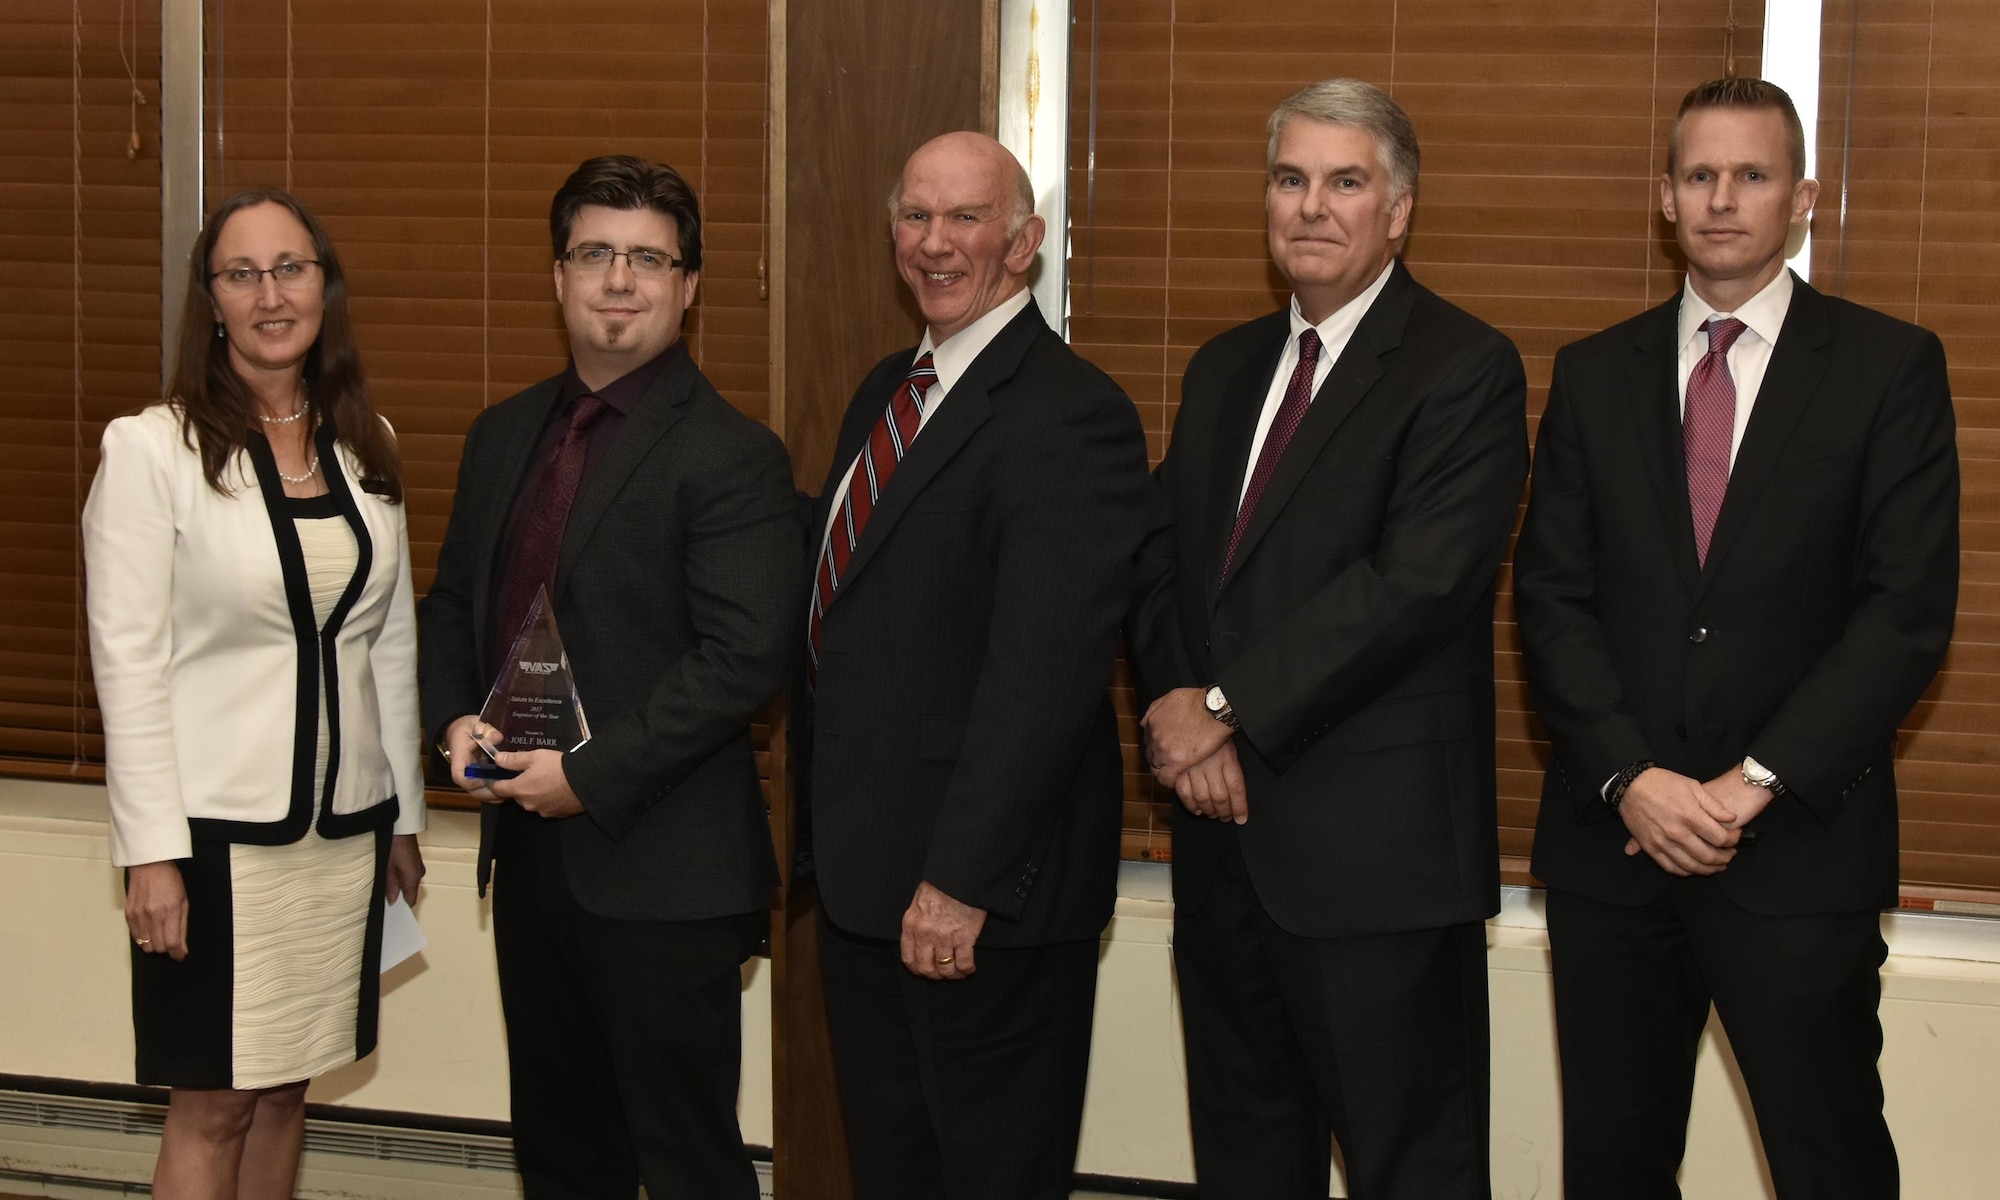 Joel Barr (second from left), NAS electrical engineer, receives the Engineer of the Year Award from NAS General Manager Cynthia Rivera during the National Aerospace Solutions 2017 Salute to Excellence Annual Awards Banquet held Nov. 16 at the Arnold Lakeside Center, Arnold AFB. Also pictured is NAS Deputy General Manager Doug Pearson, NAS Test and Sustainment Engineering Manager Jeff Henderson and NAS Integrated Resources Director Ben Souther. (U.S. Air Force photo/Rick Goodfriend)